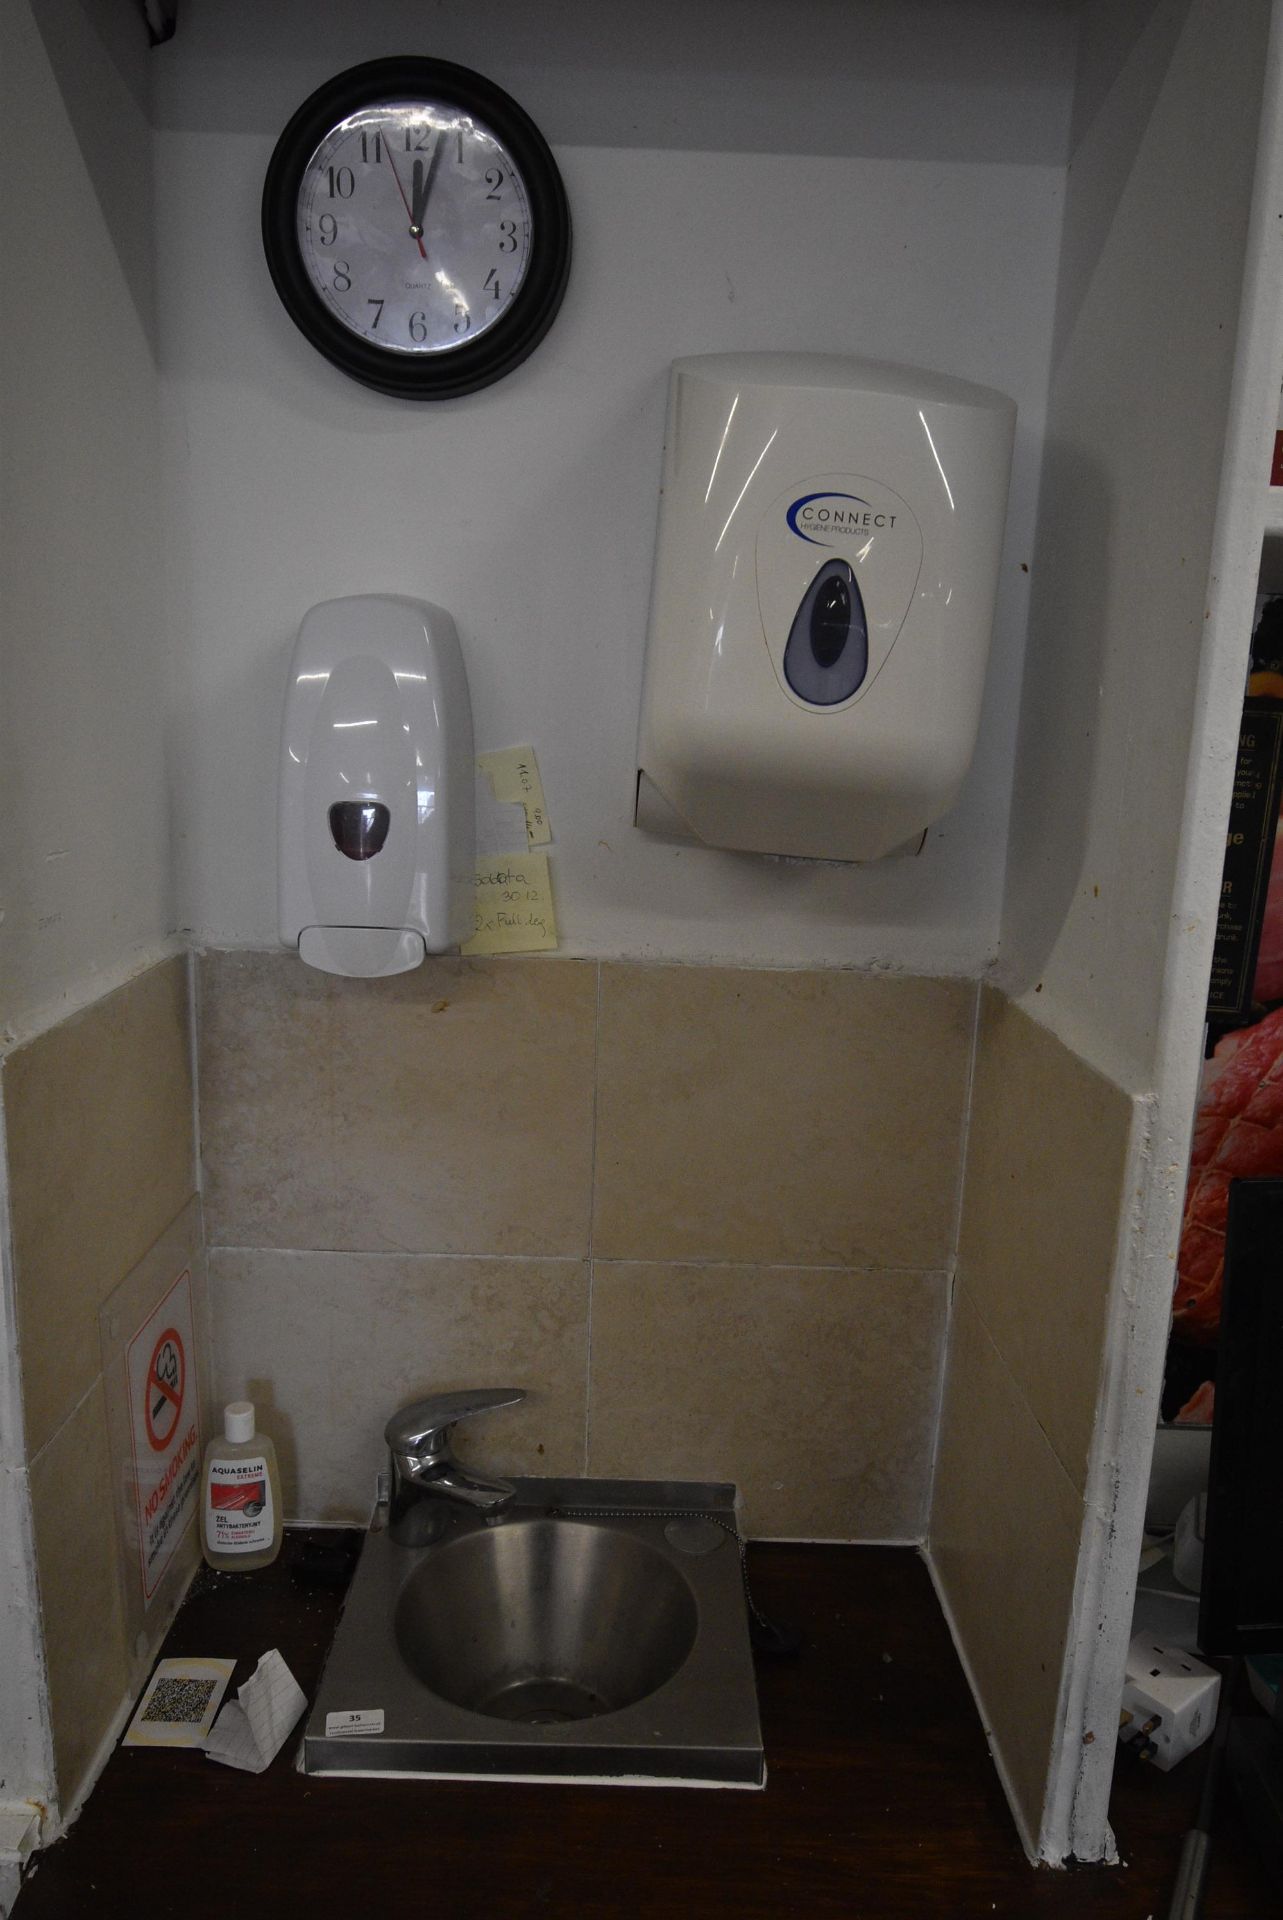 Stainless Steel Wash Hand Basin, plus Paper Towel Dispenser, and Soap Dispenser